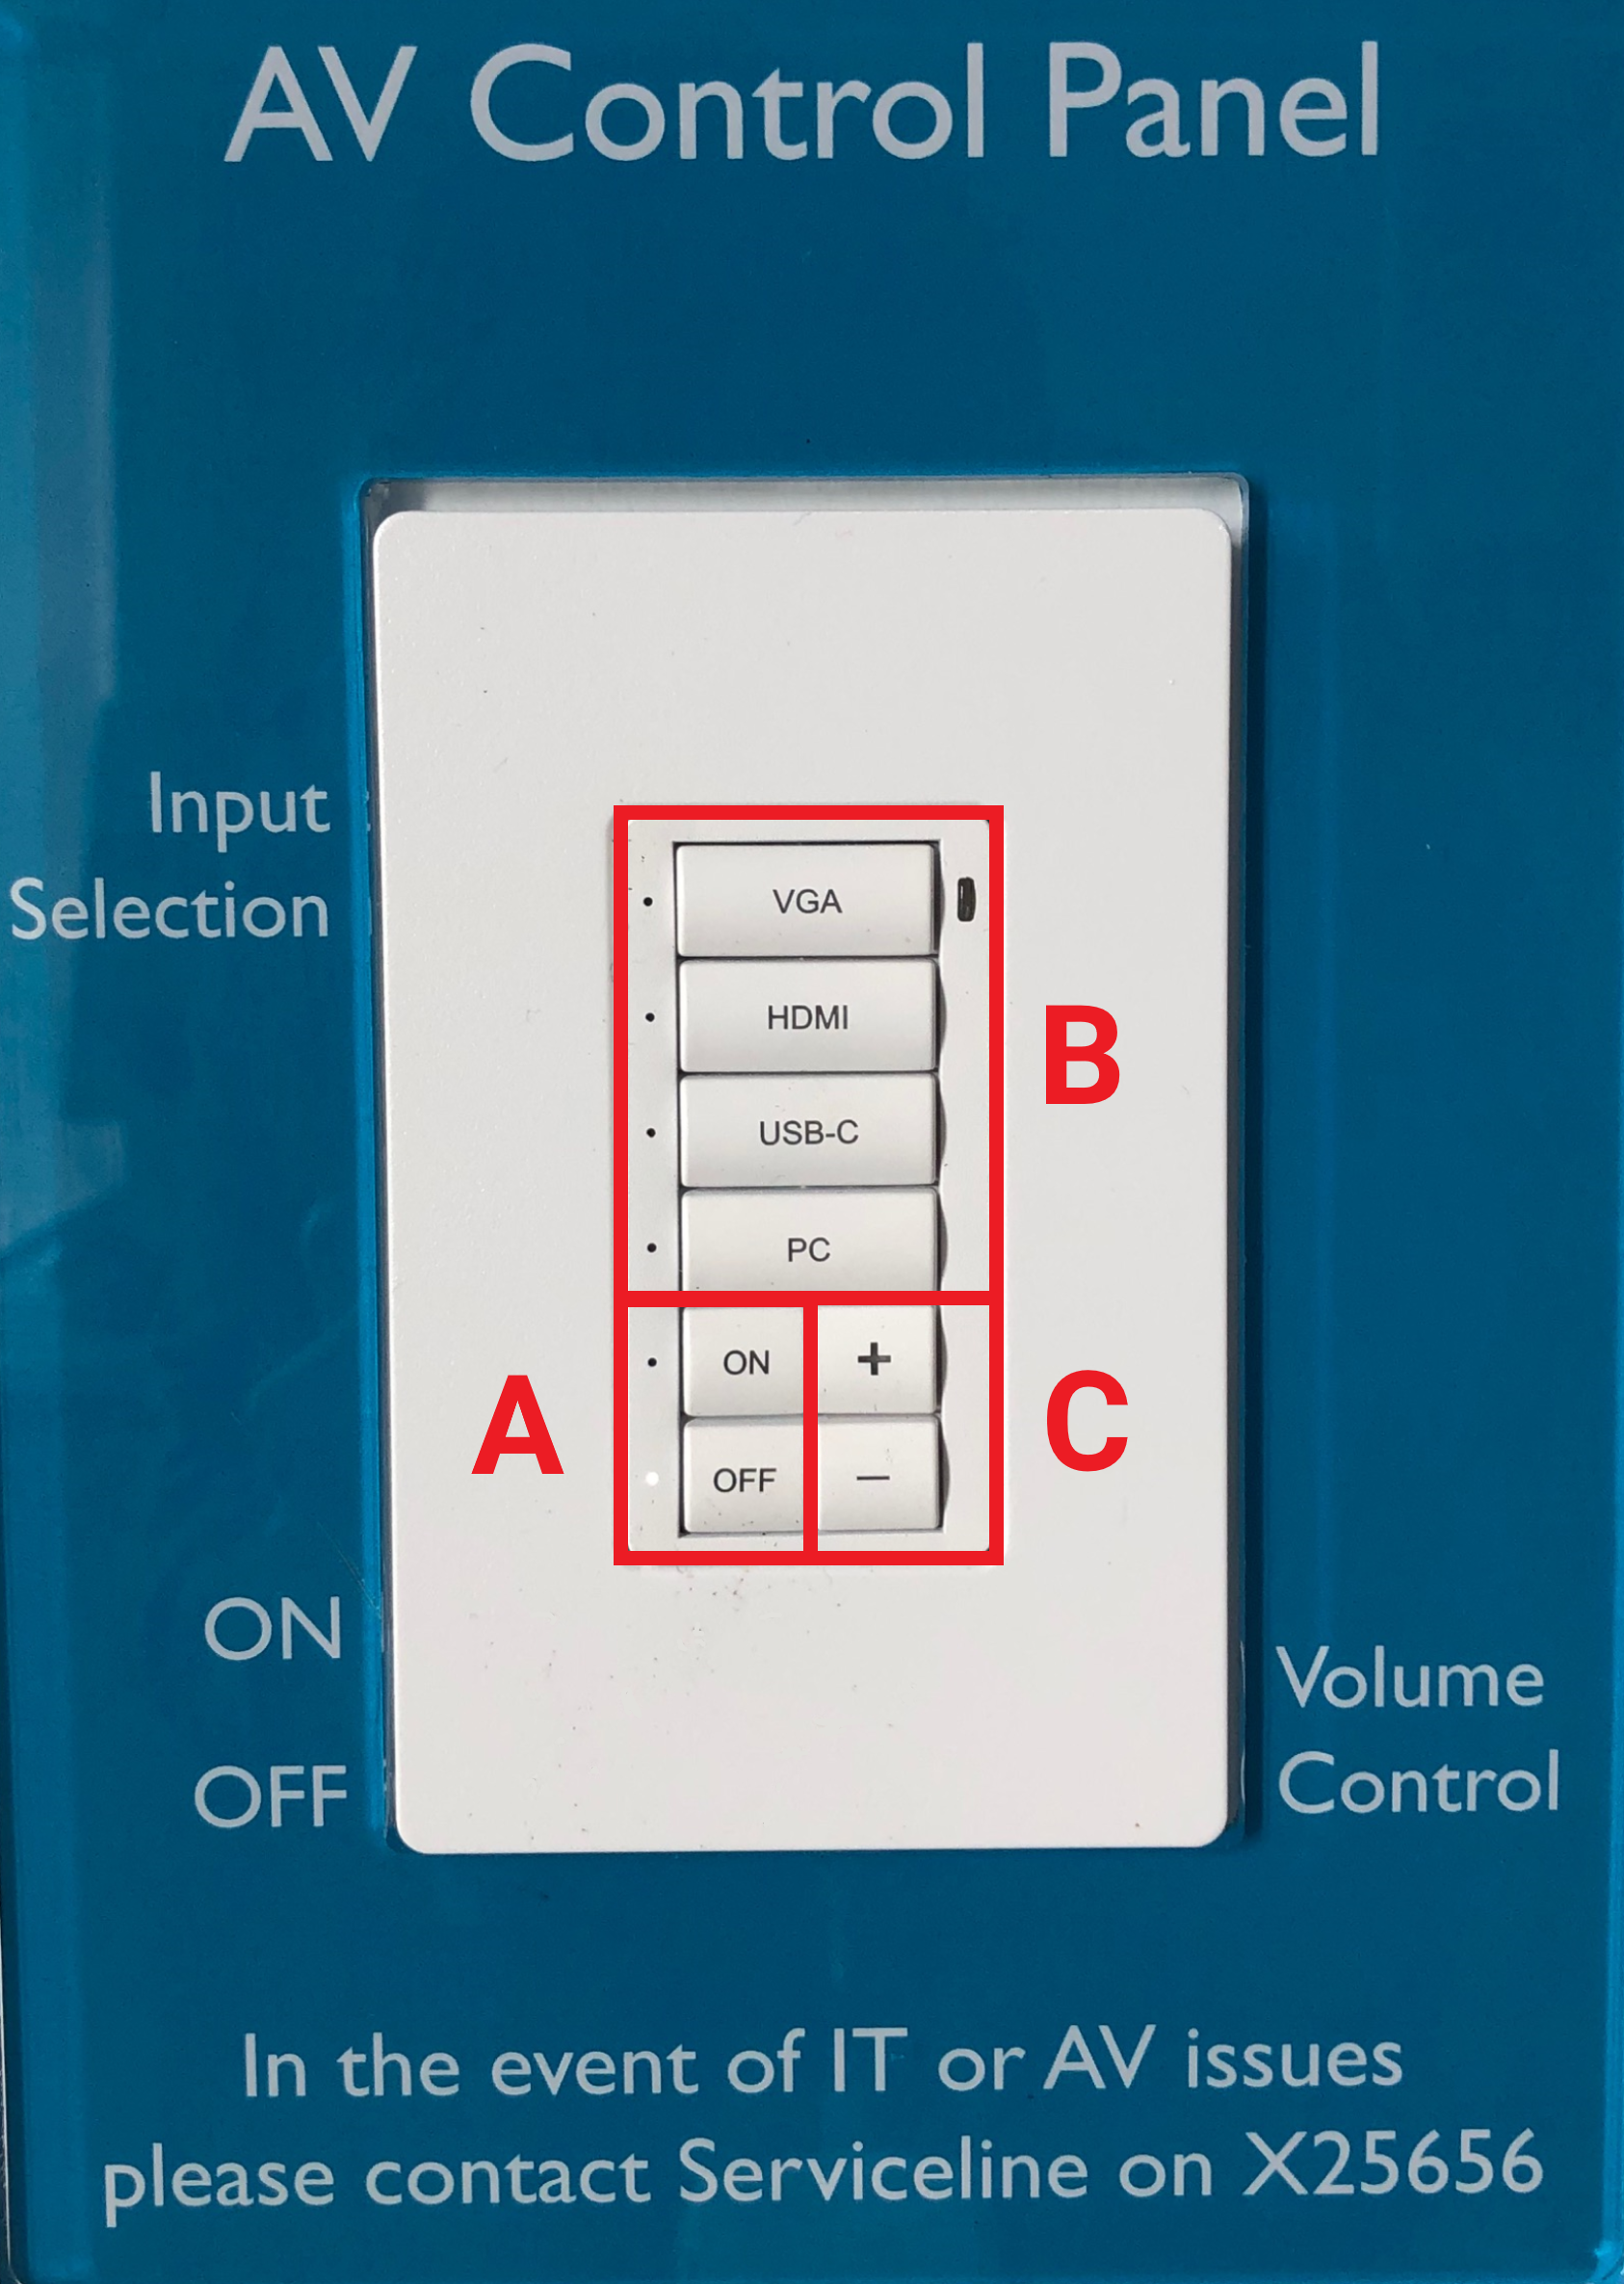 A push button wall controller. Button actions from top to bottom. VGA. HDMI. USB C. PC. On. Volume up. Off. Volume down.